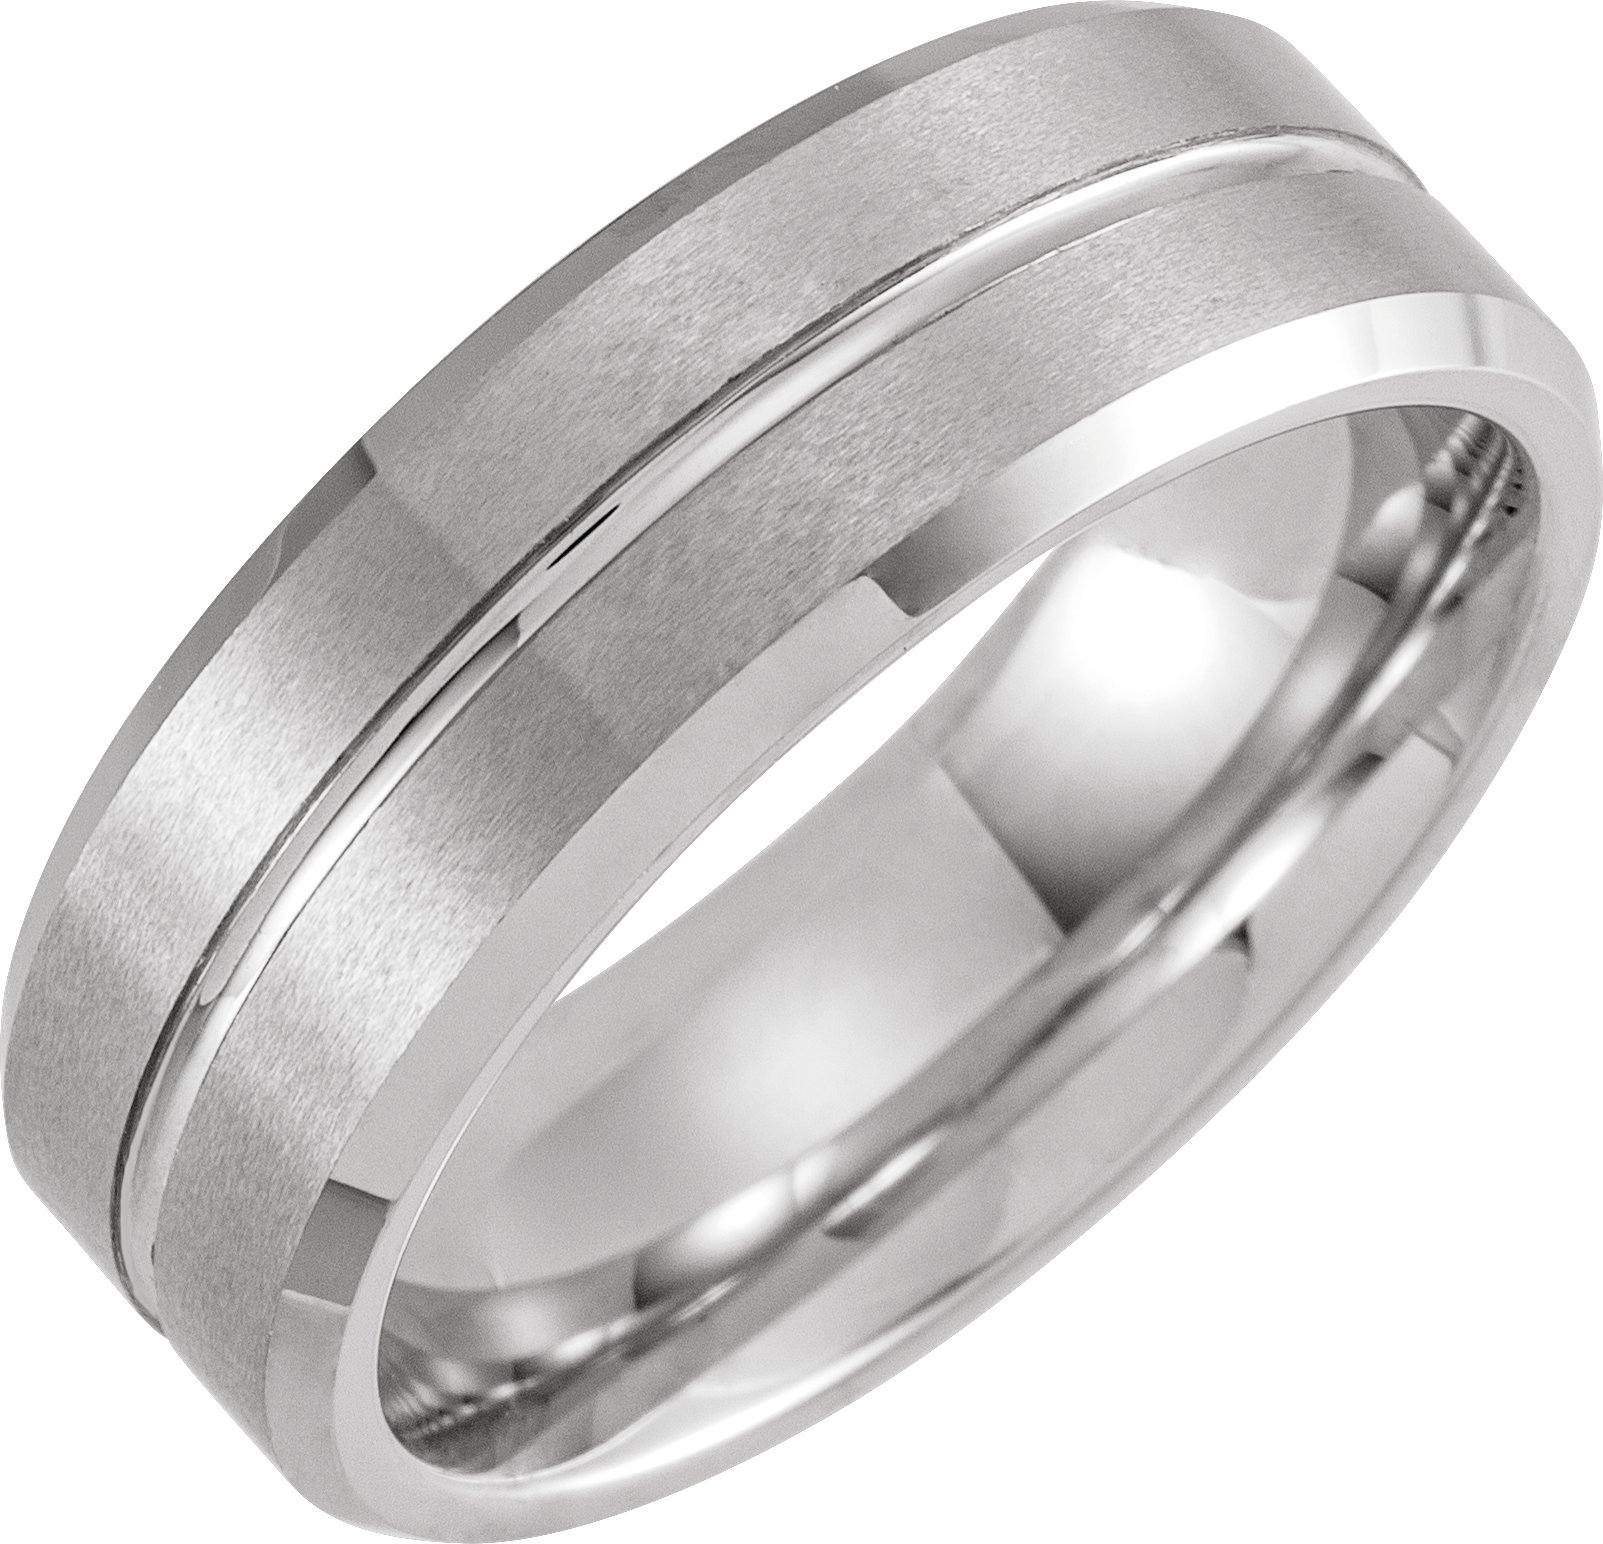 White PVD Tungsten 8 mm Beveled Grooved Matte Band Size 8 